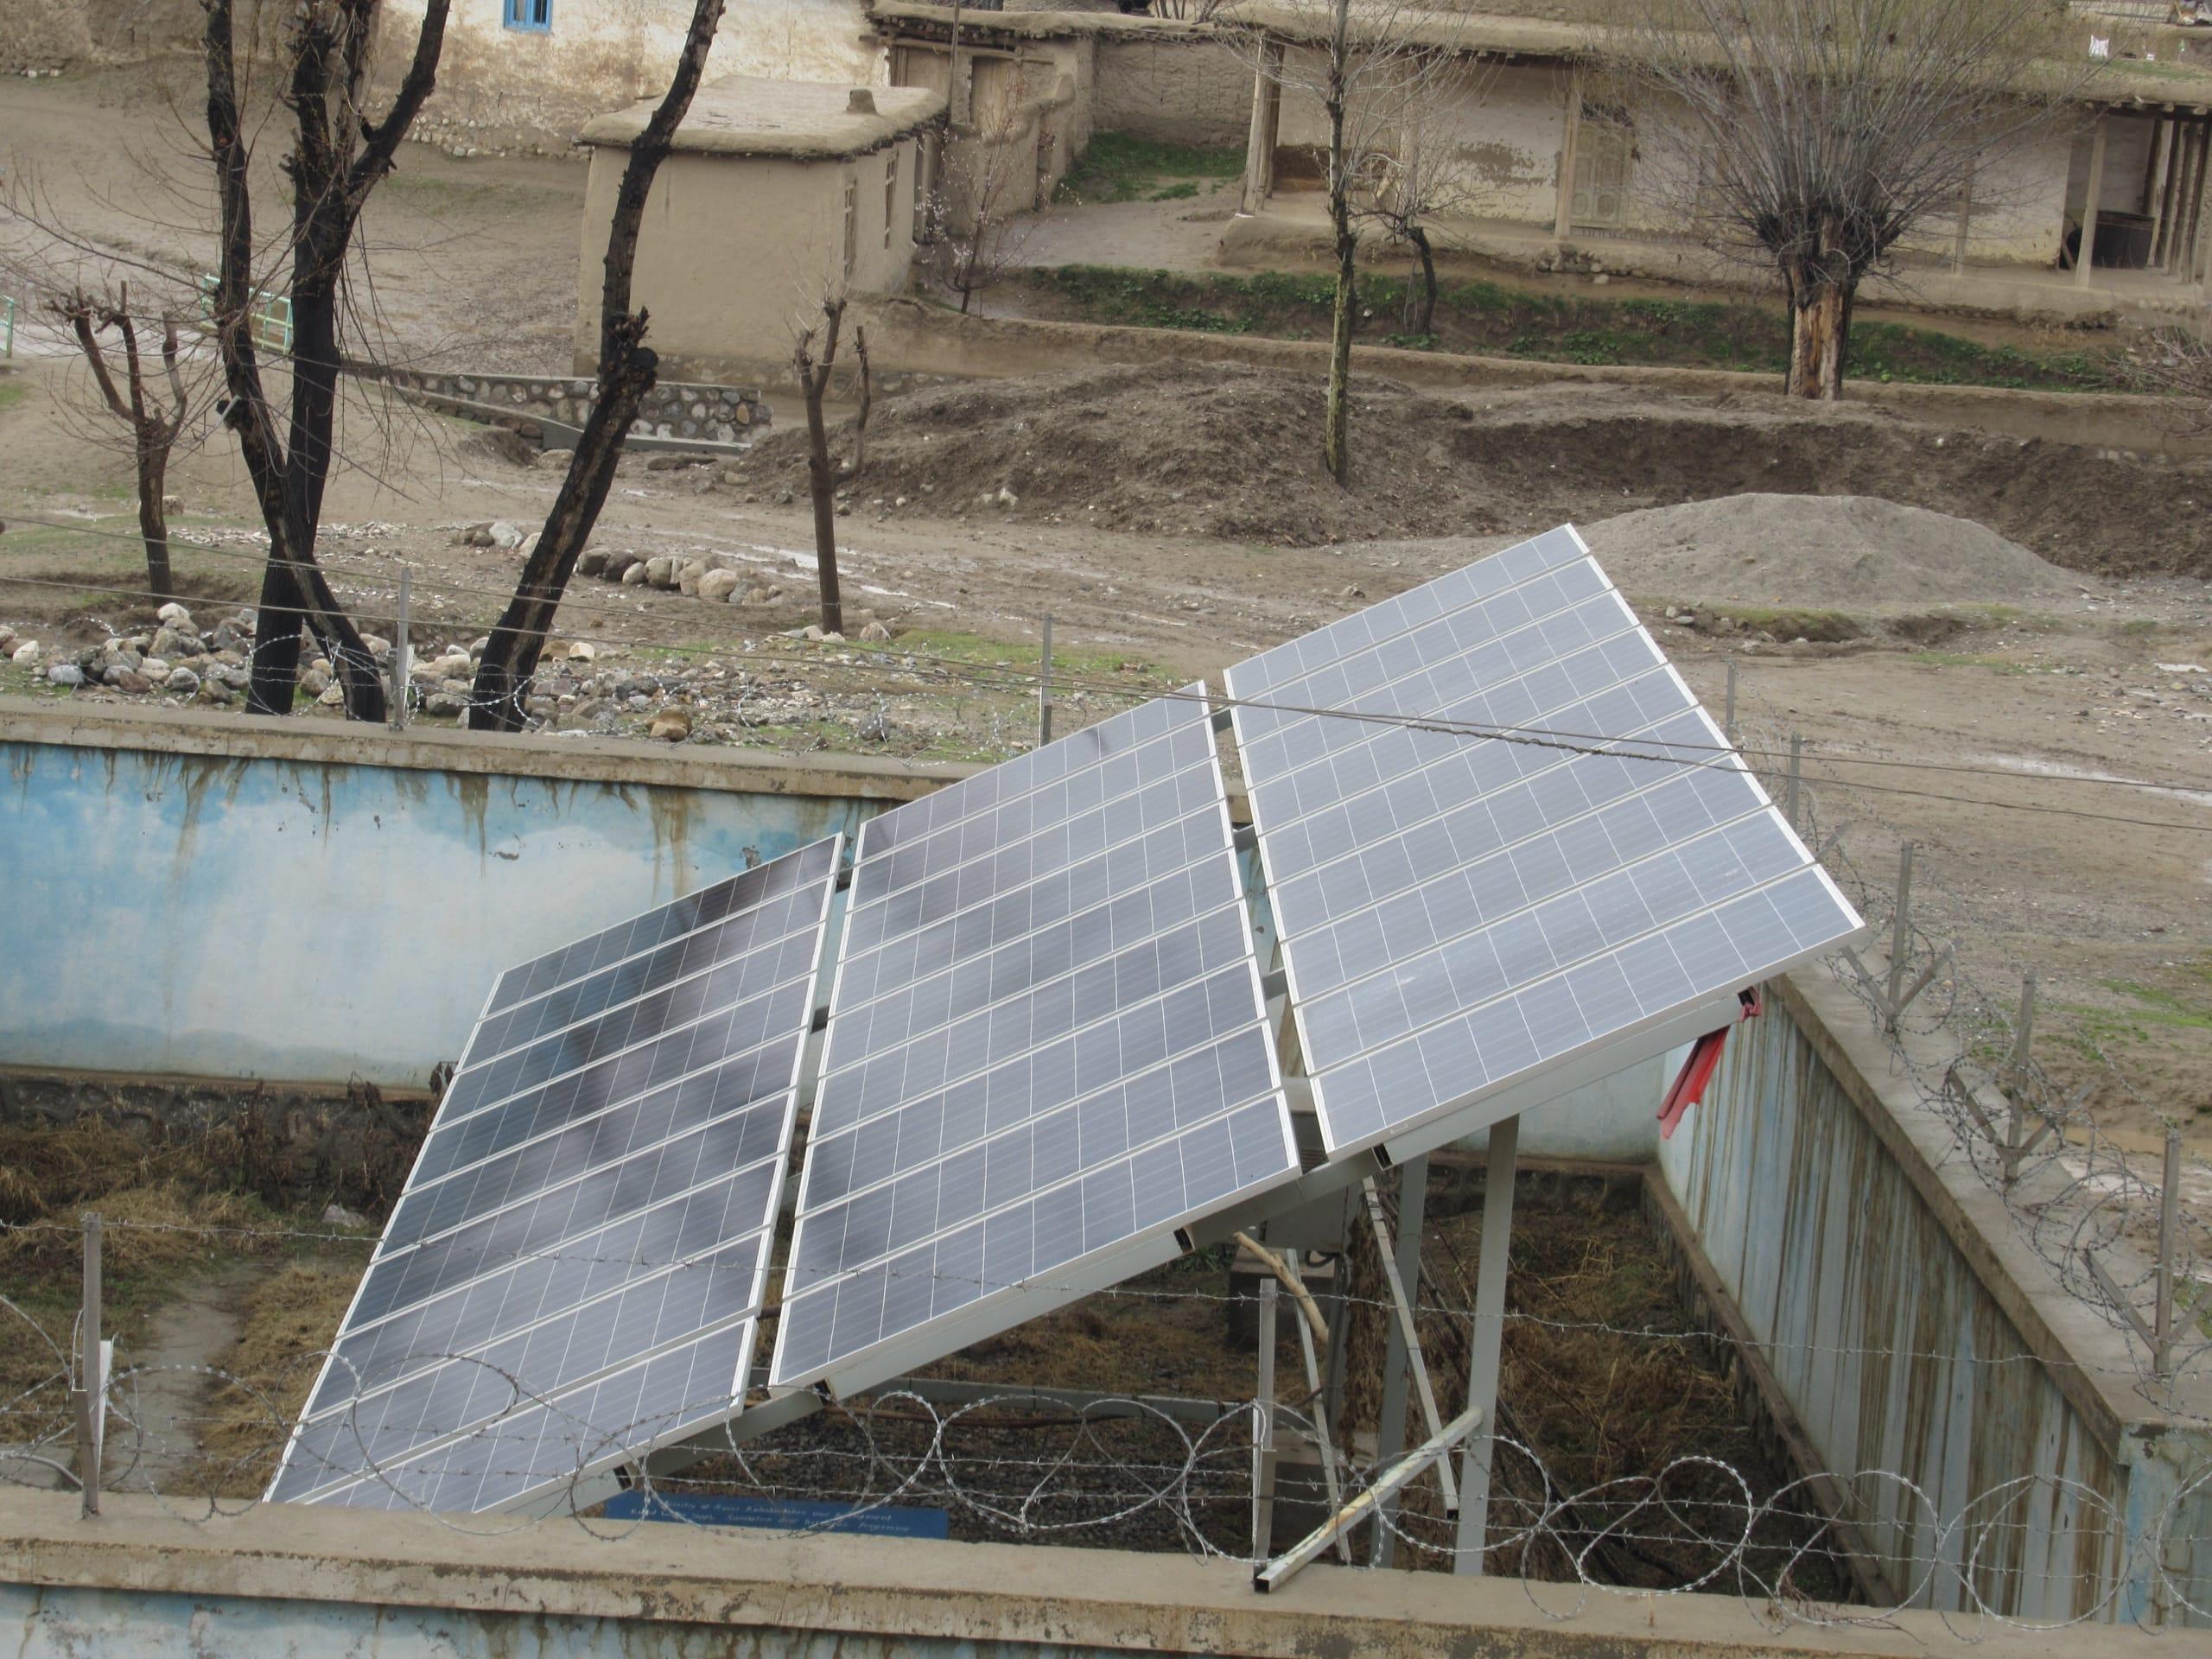 Different PV plant that can provide electricity to a number of households and businesses.